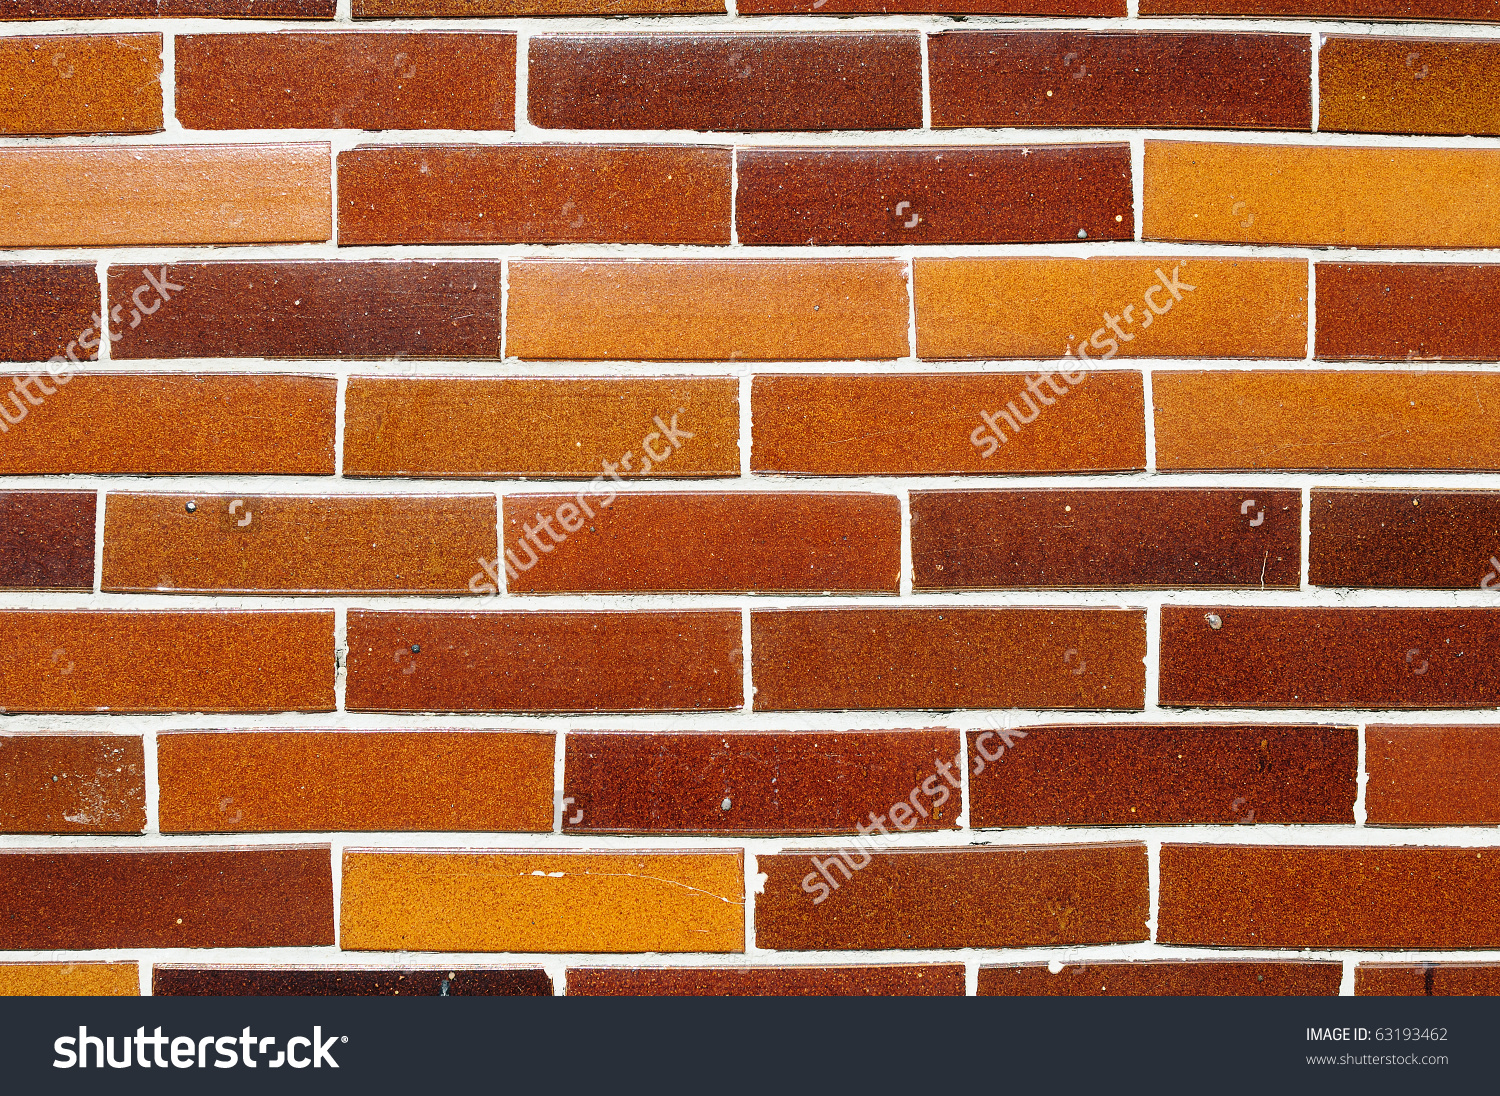 Fragment Of Wall Built Out Of Terracotta Bricks Stock Photo.